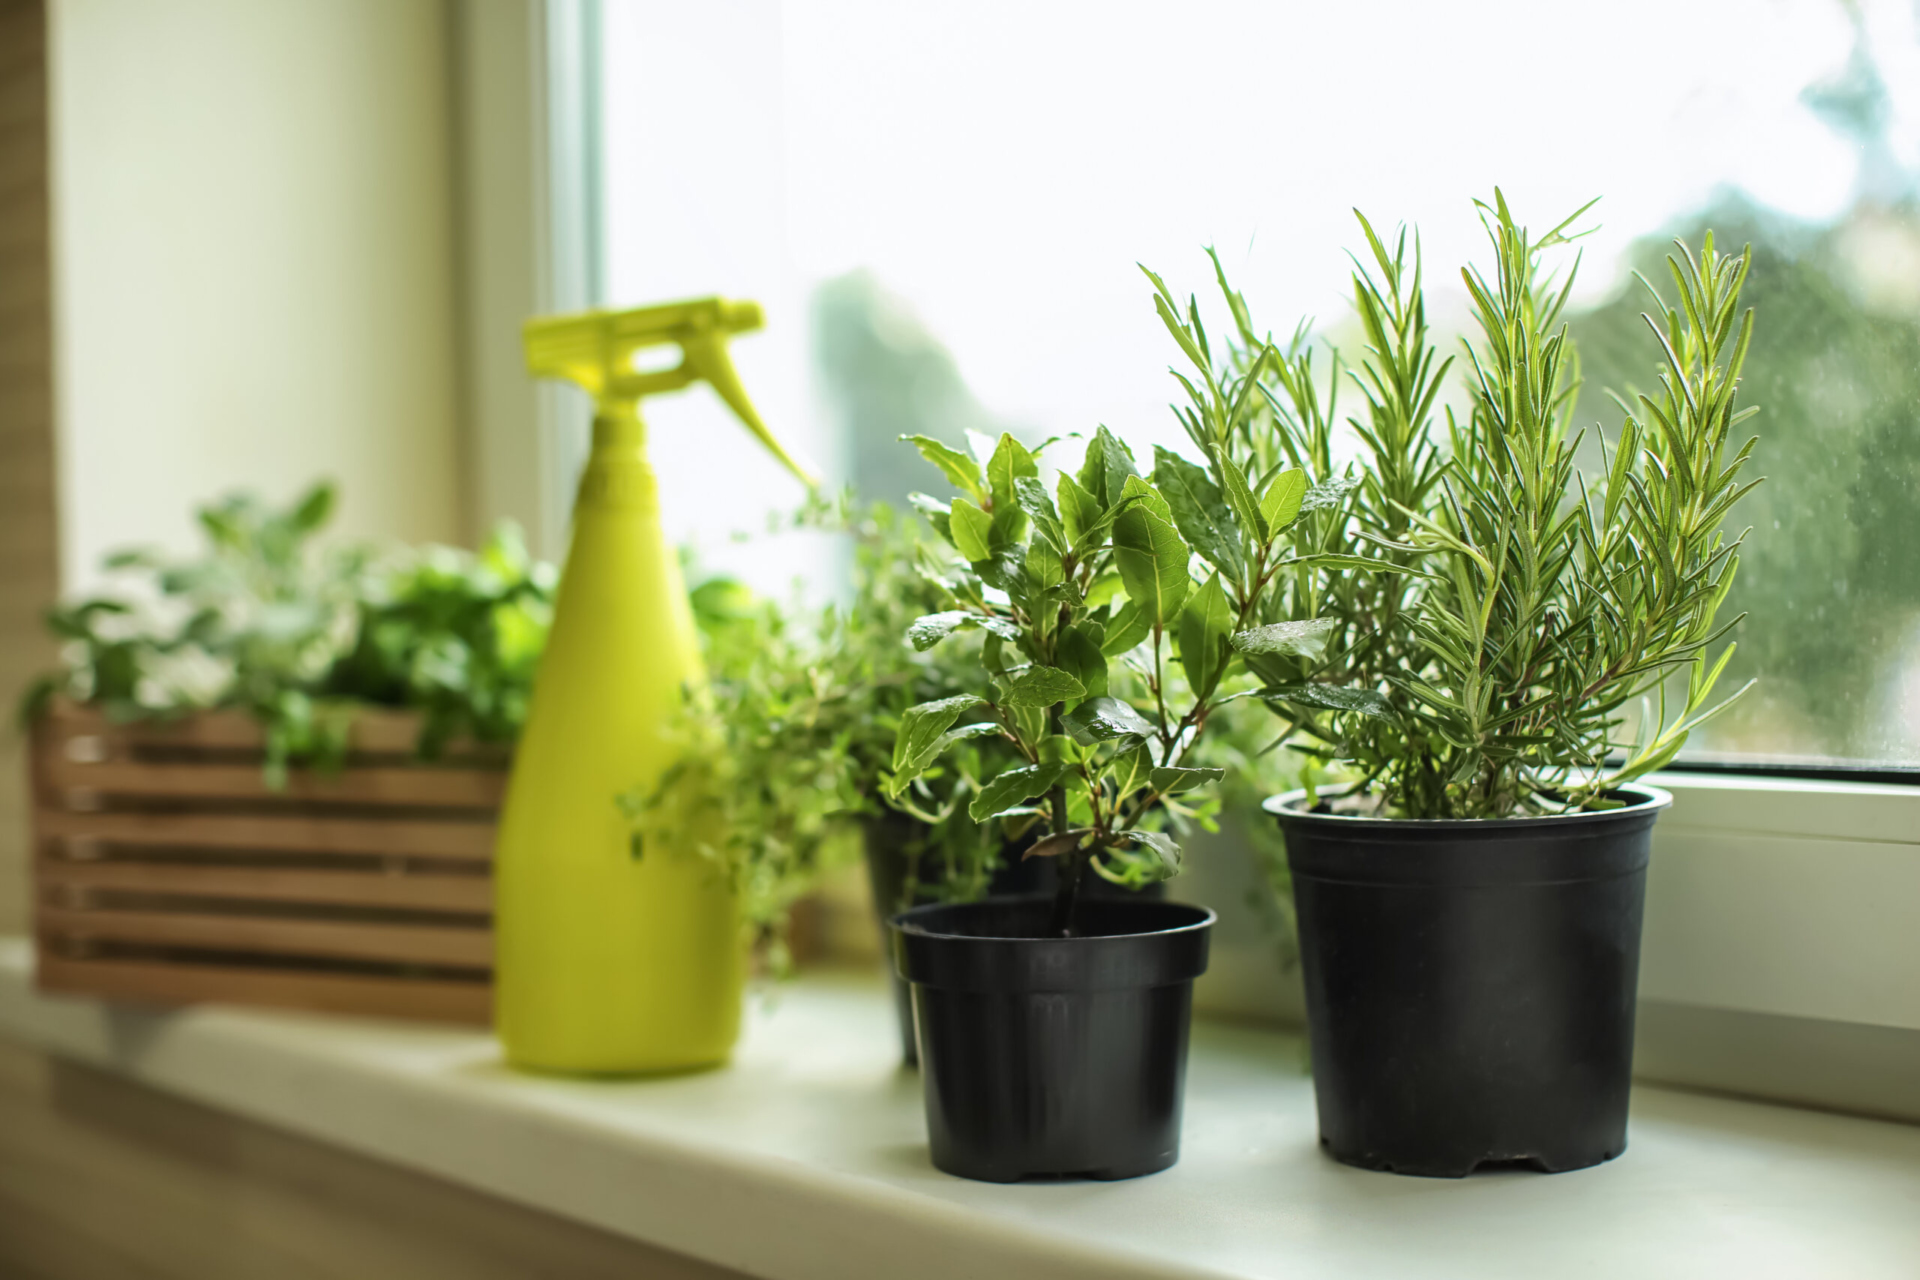 Various potted herbs sitting on a window sill with a water bottle for misting sitting behind them.